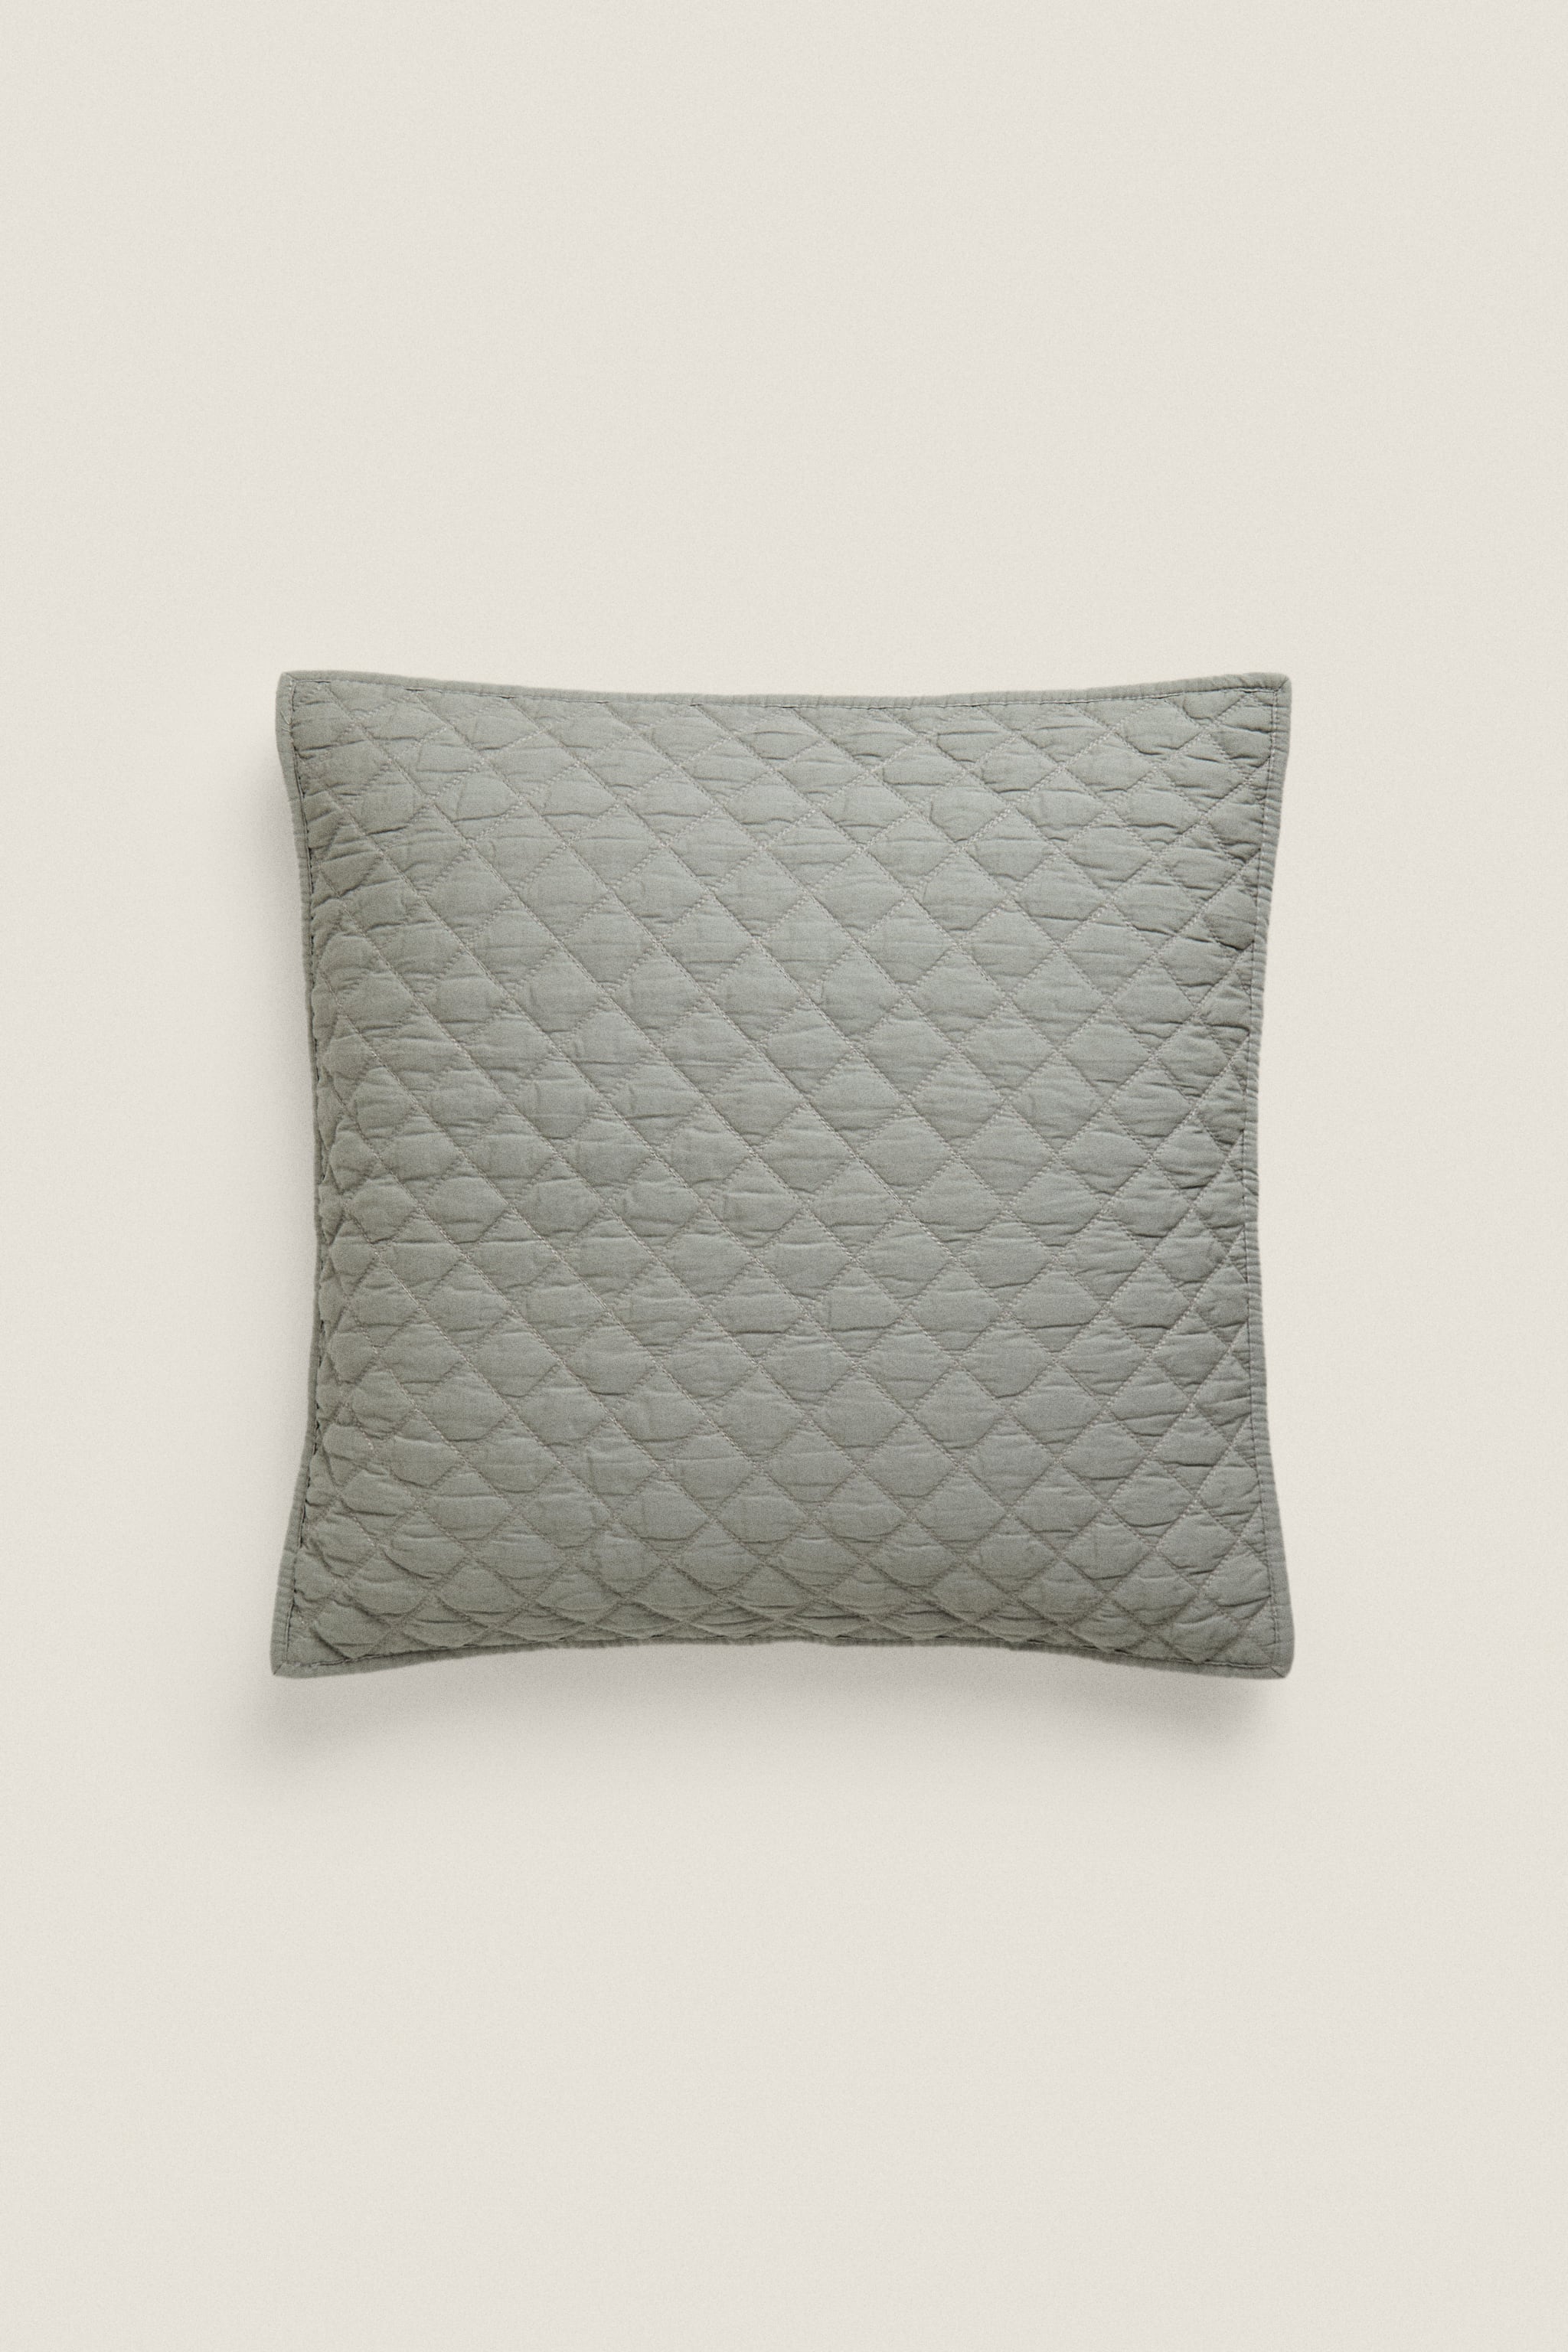 DIAMOND QUILTED THROW PILLOW COVER